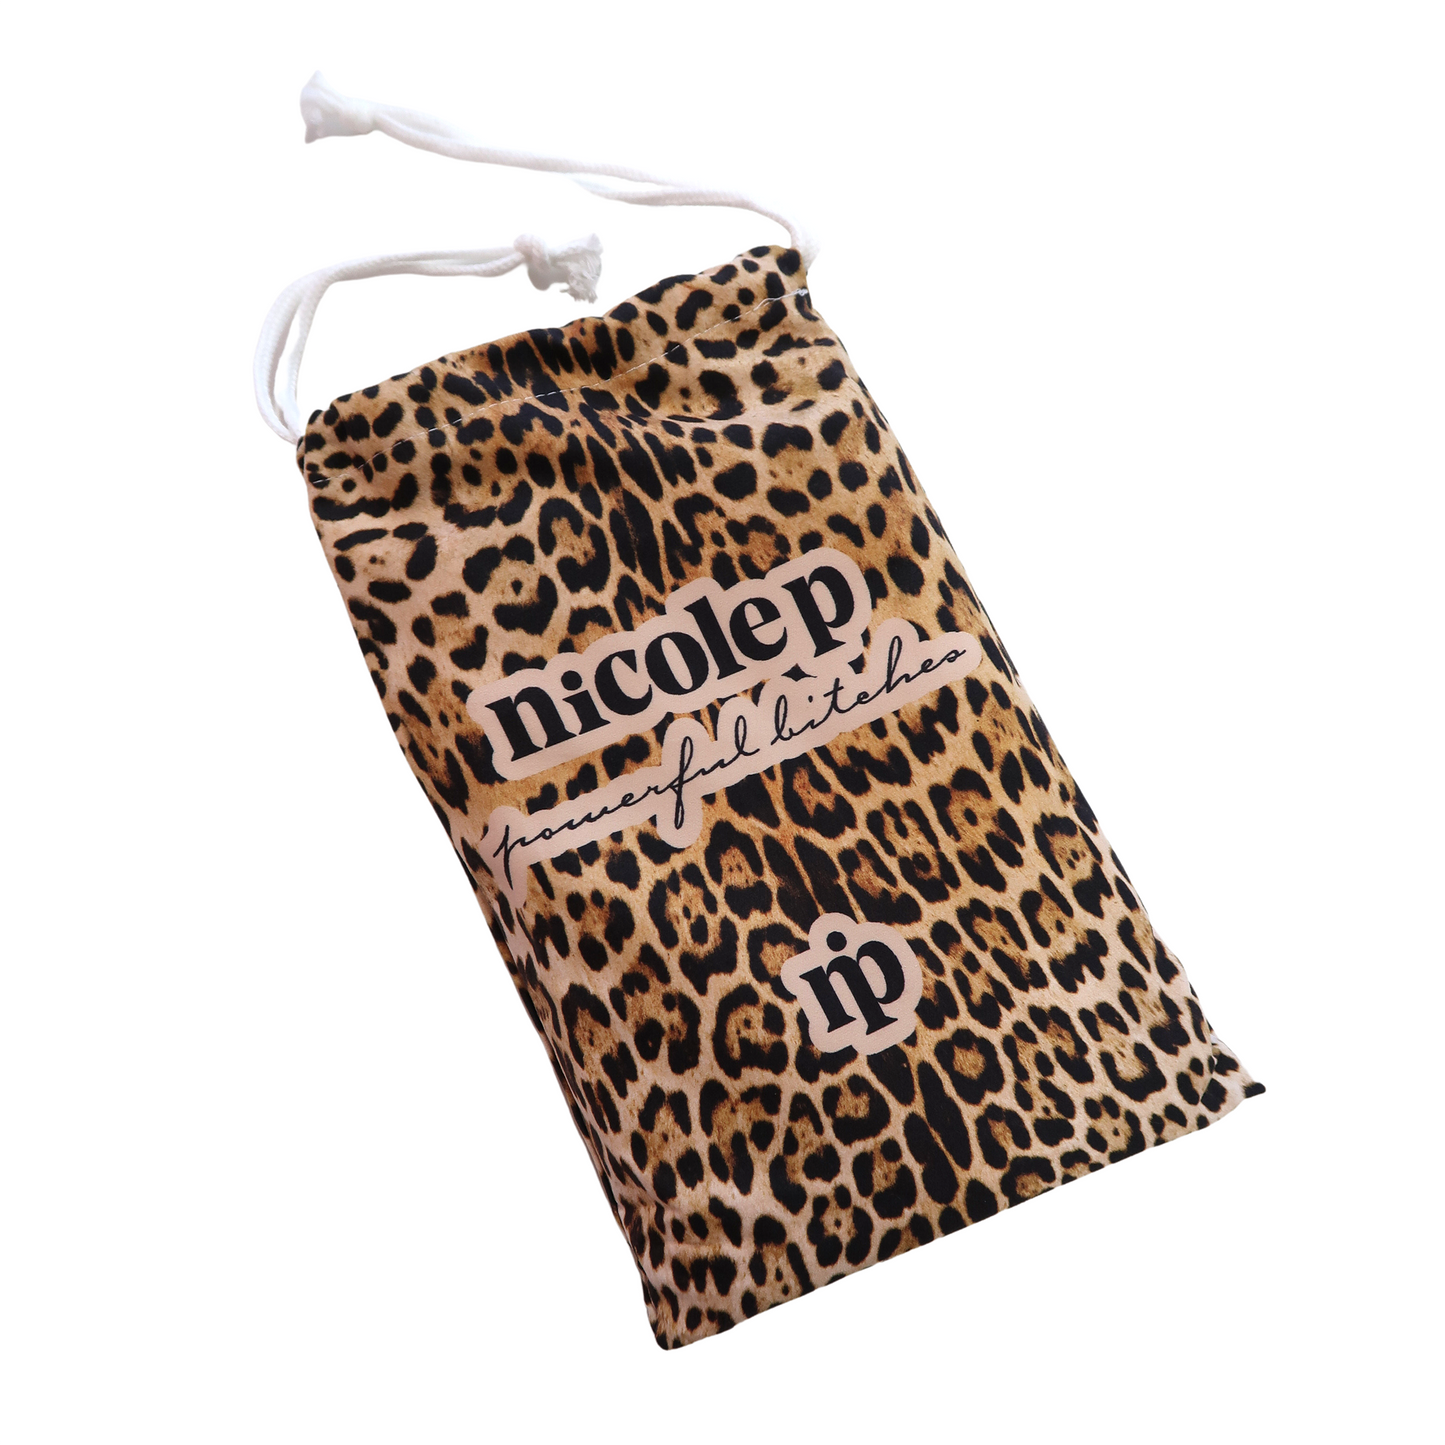 Leopard Obsessed towel